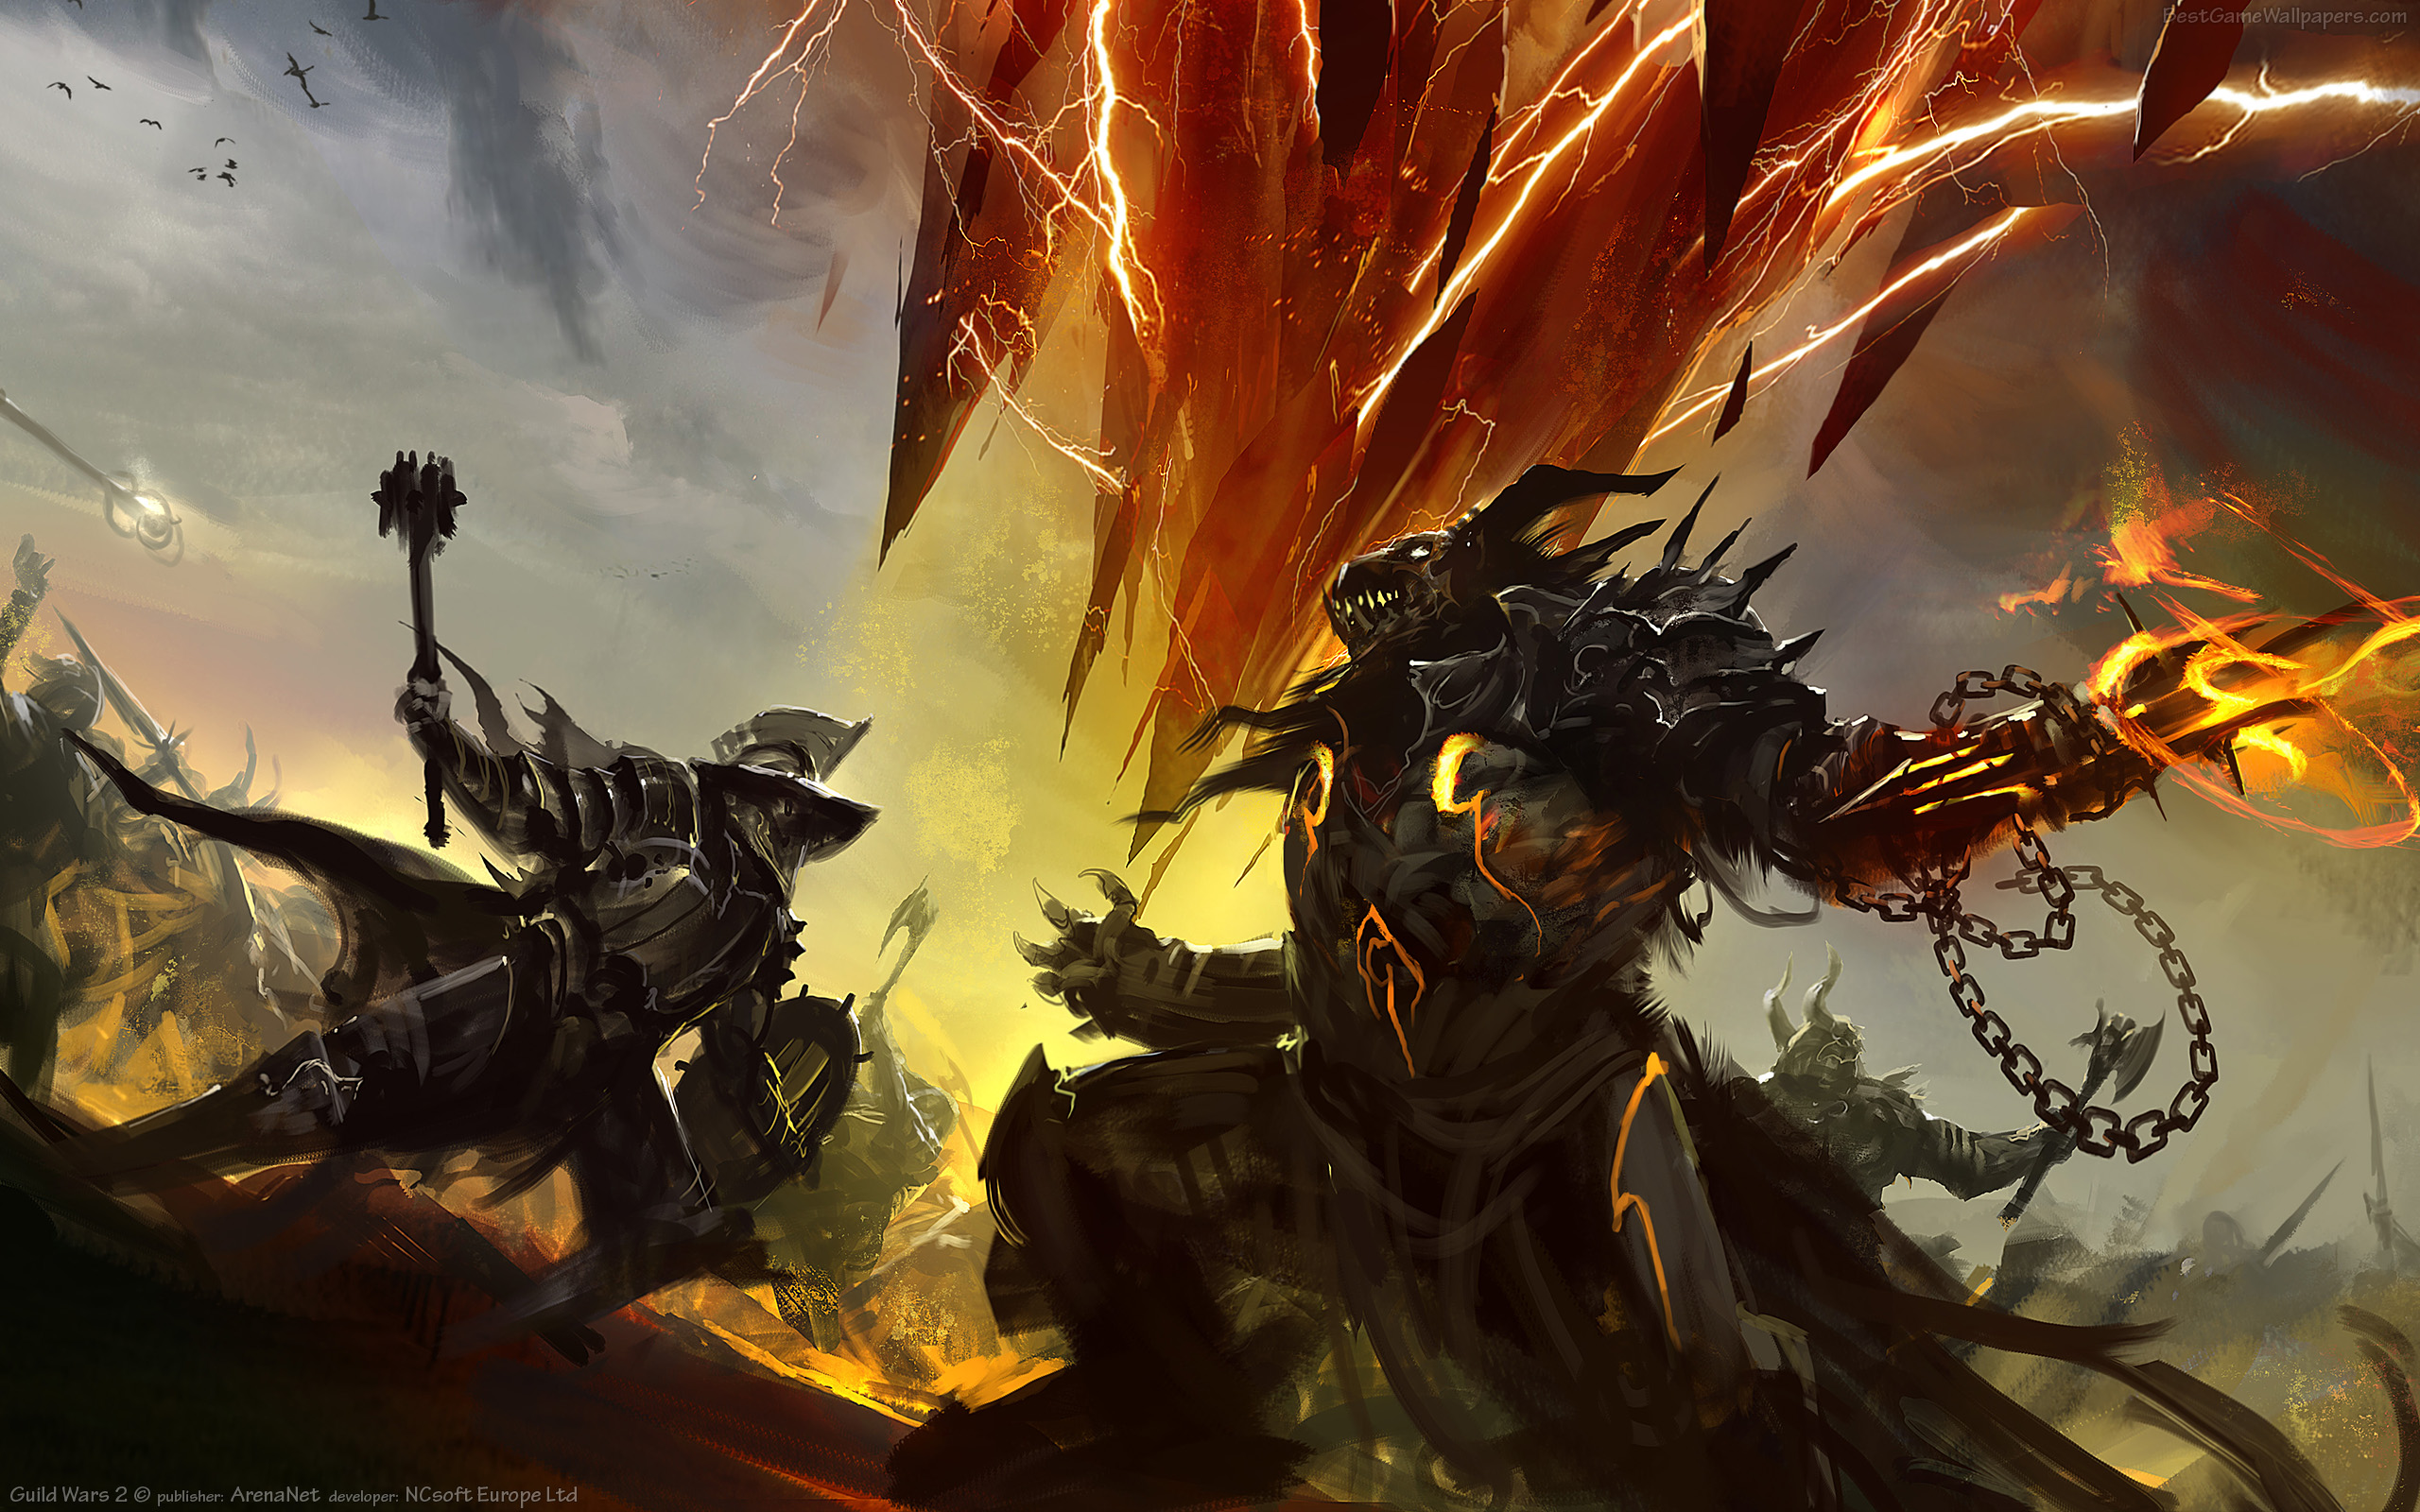 epic battle wallpaper,action adventure game,cg artwork,strategy video game,pc game,geological phenomenon